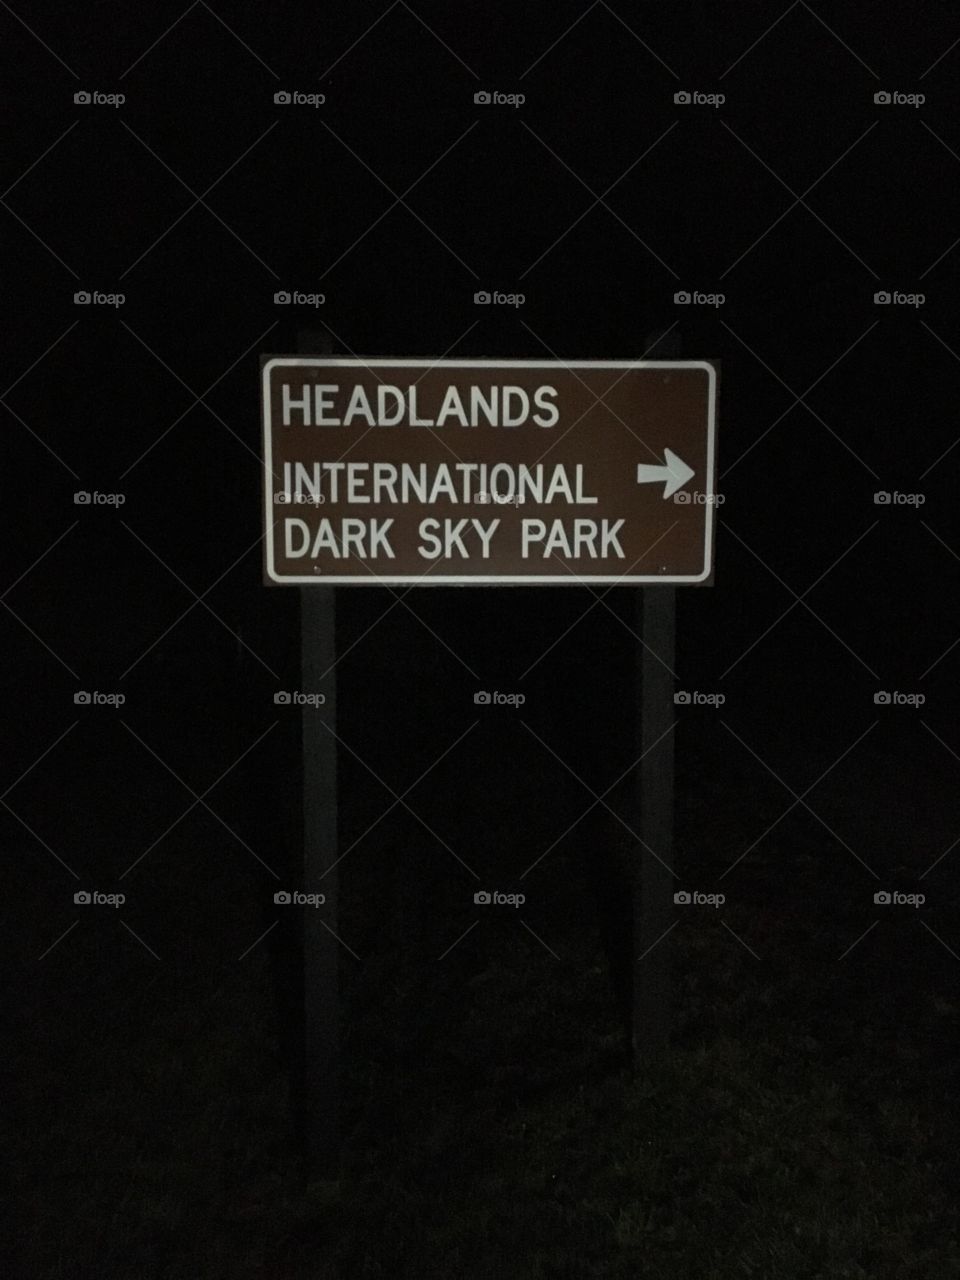 A sign for the Headlands International Dark Sky Park in northern Michigan.